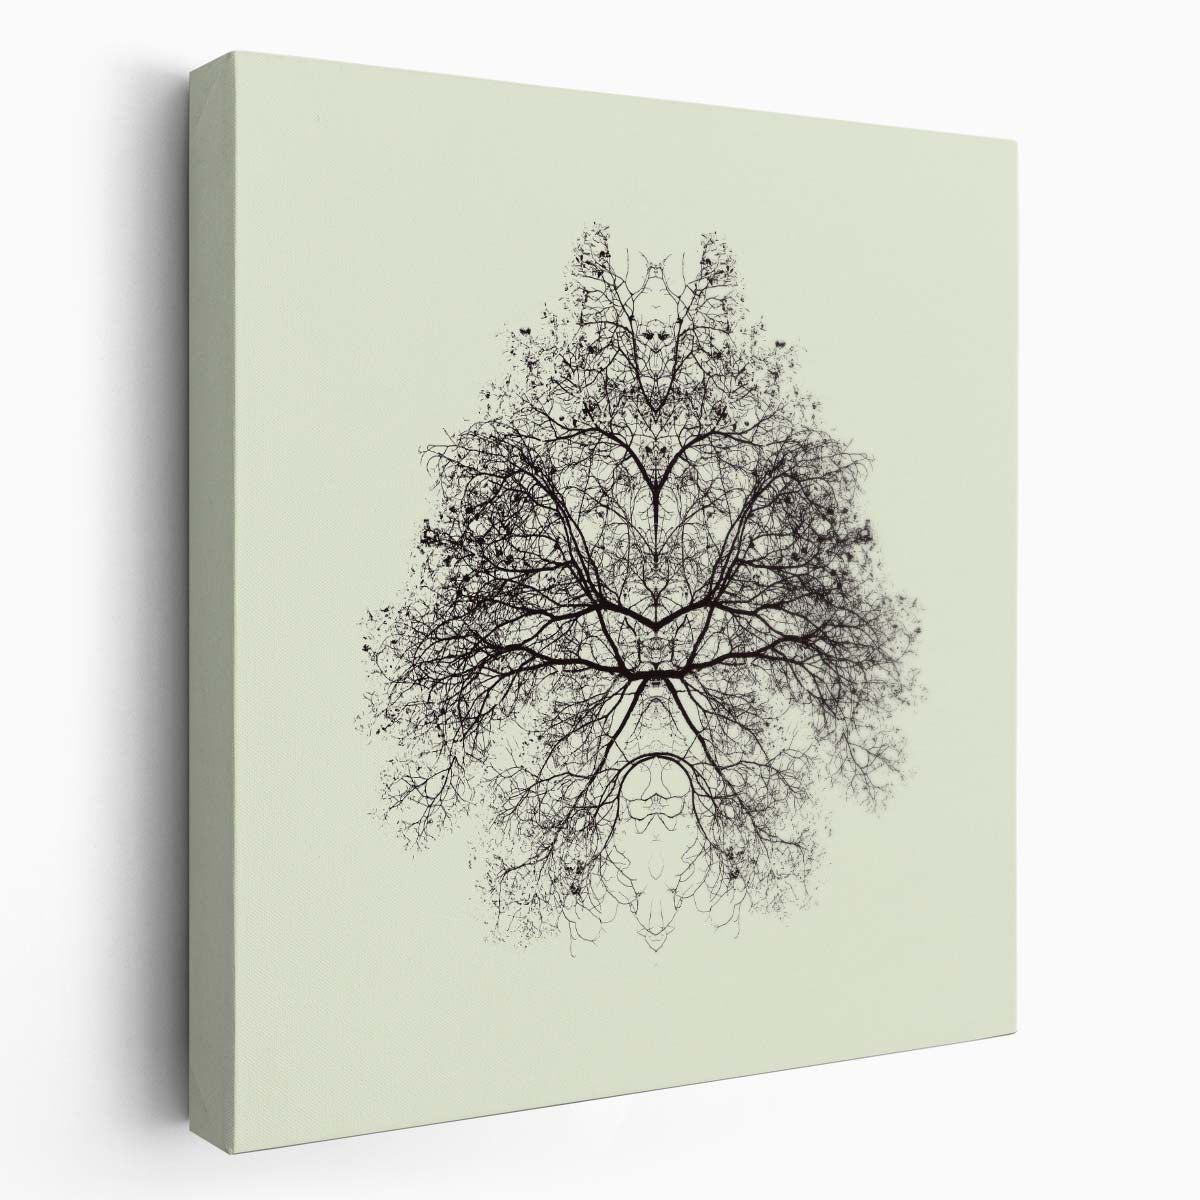 Abstract Tree Pattern Inspired by Rorschach Test Photography Wall Art by Luxuriance Designs. Made in USA.